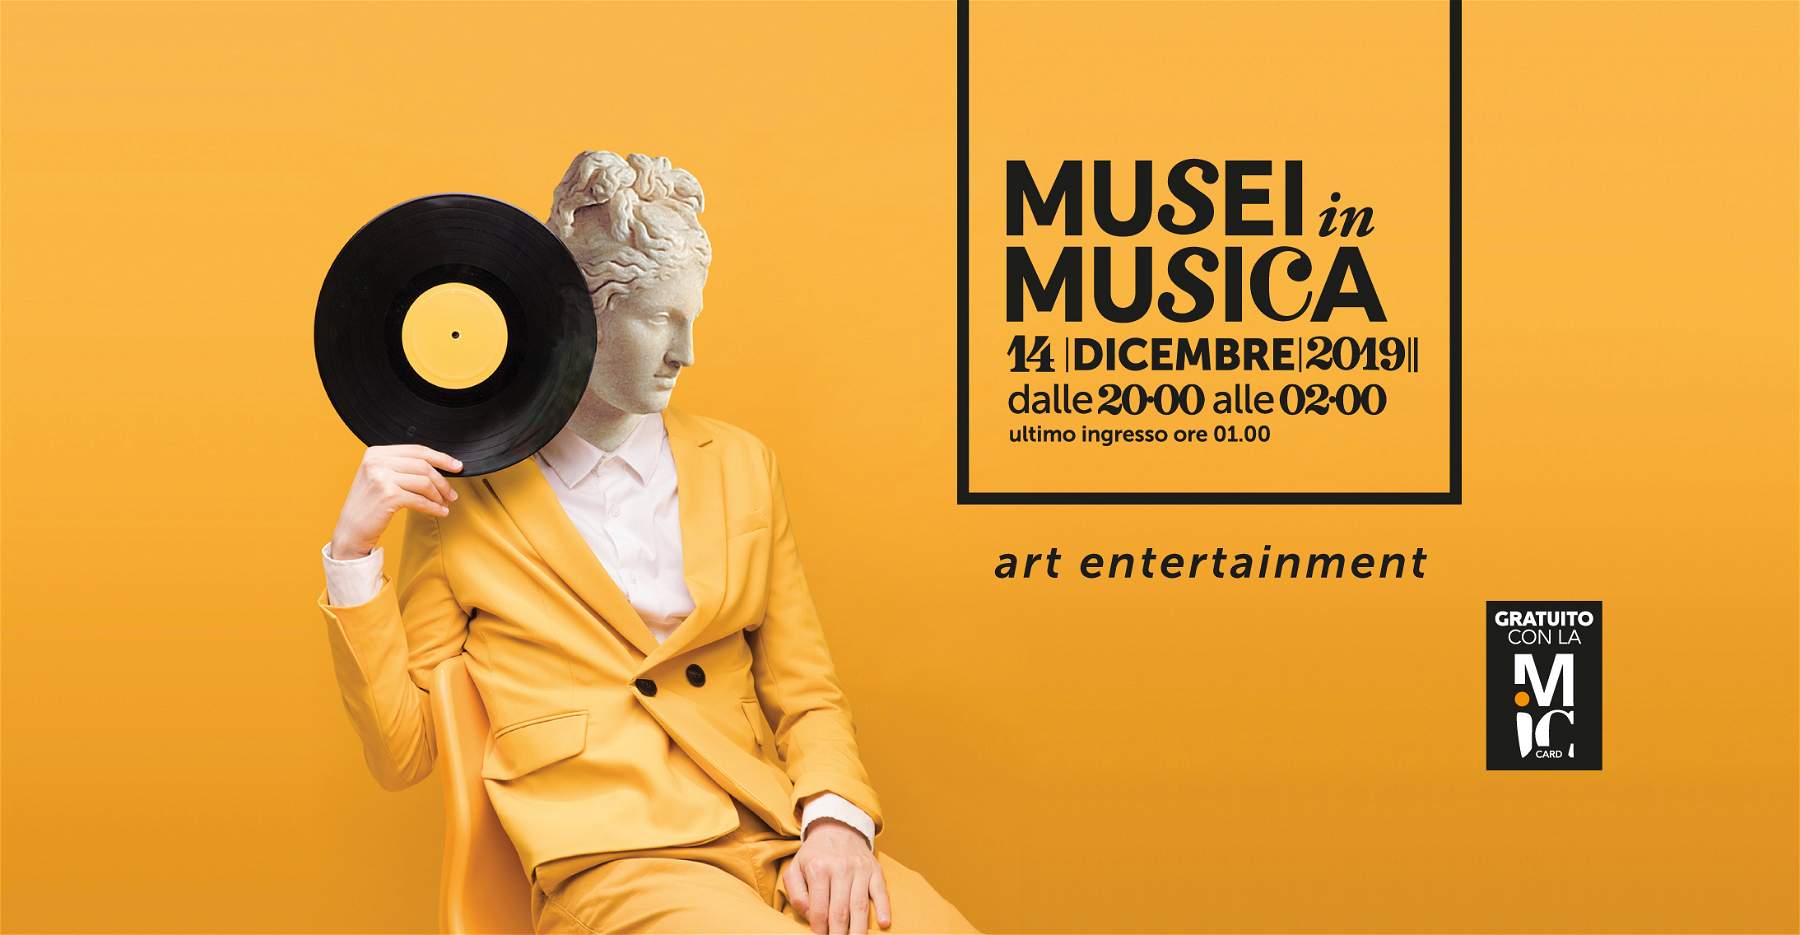 In Rome, live music in museums with the 11th edition of 